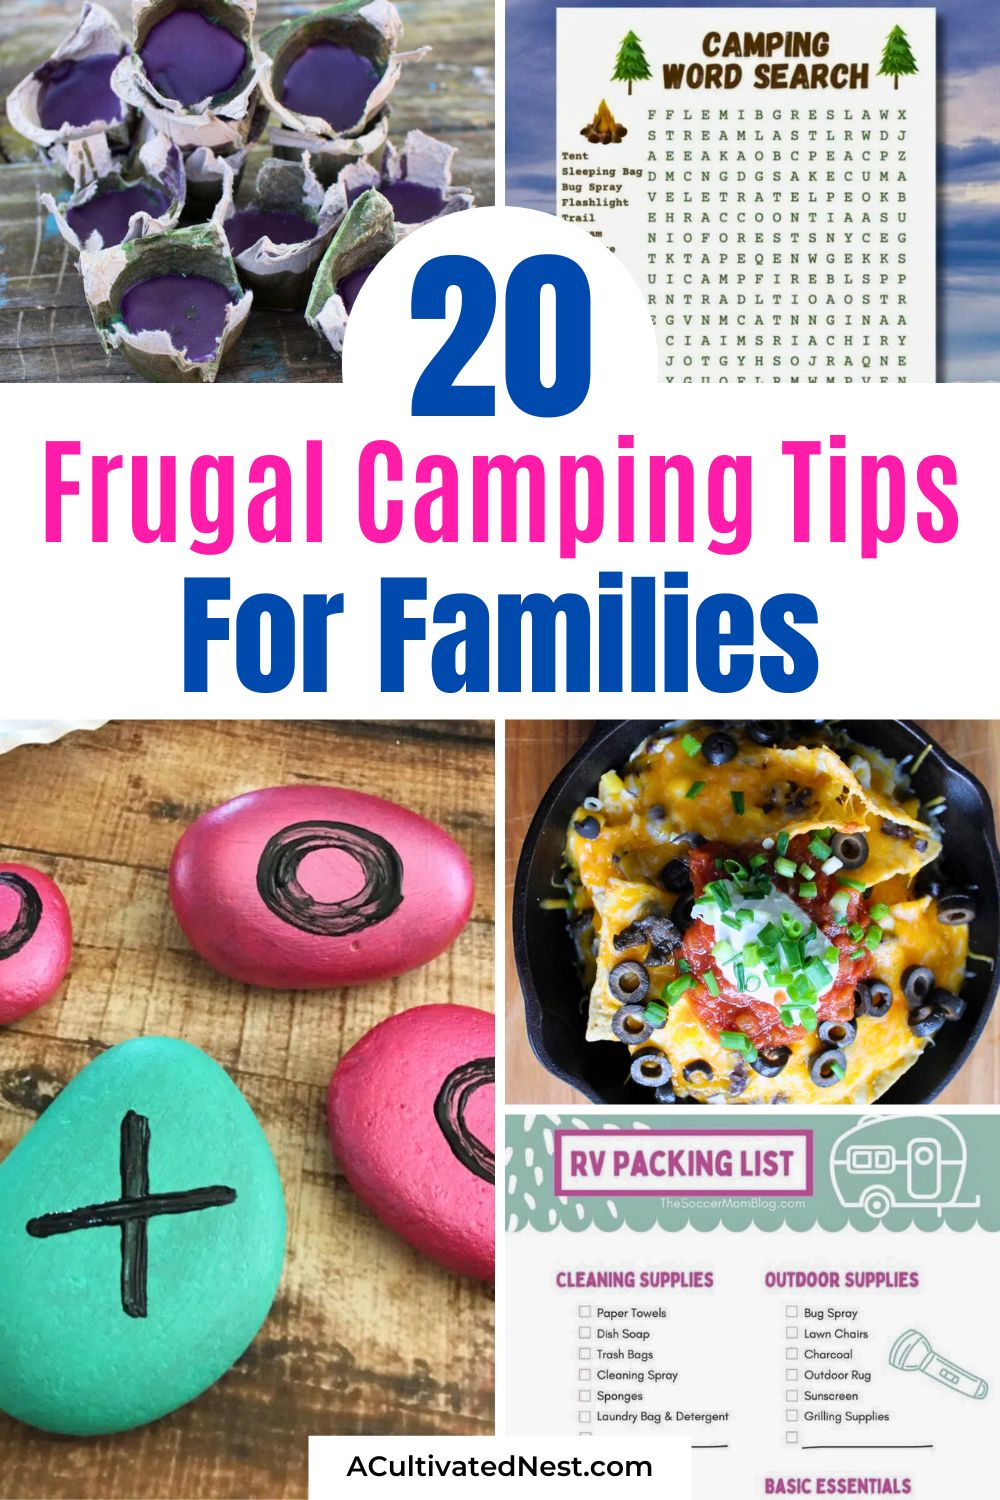 20 Tips for How To Go Camping On A Budget- Planning a camping trip but worried about costs? Check out our top tips for camping on a budget! From affordable gear to money-saving hacks, we've got you covered. Make your next outdoor adventure both fun and affordable! | #camping #CampingTips #vacationPlanning #moneySavingTips #ACultivatedNest